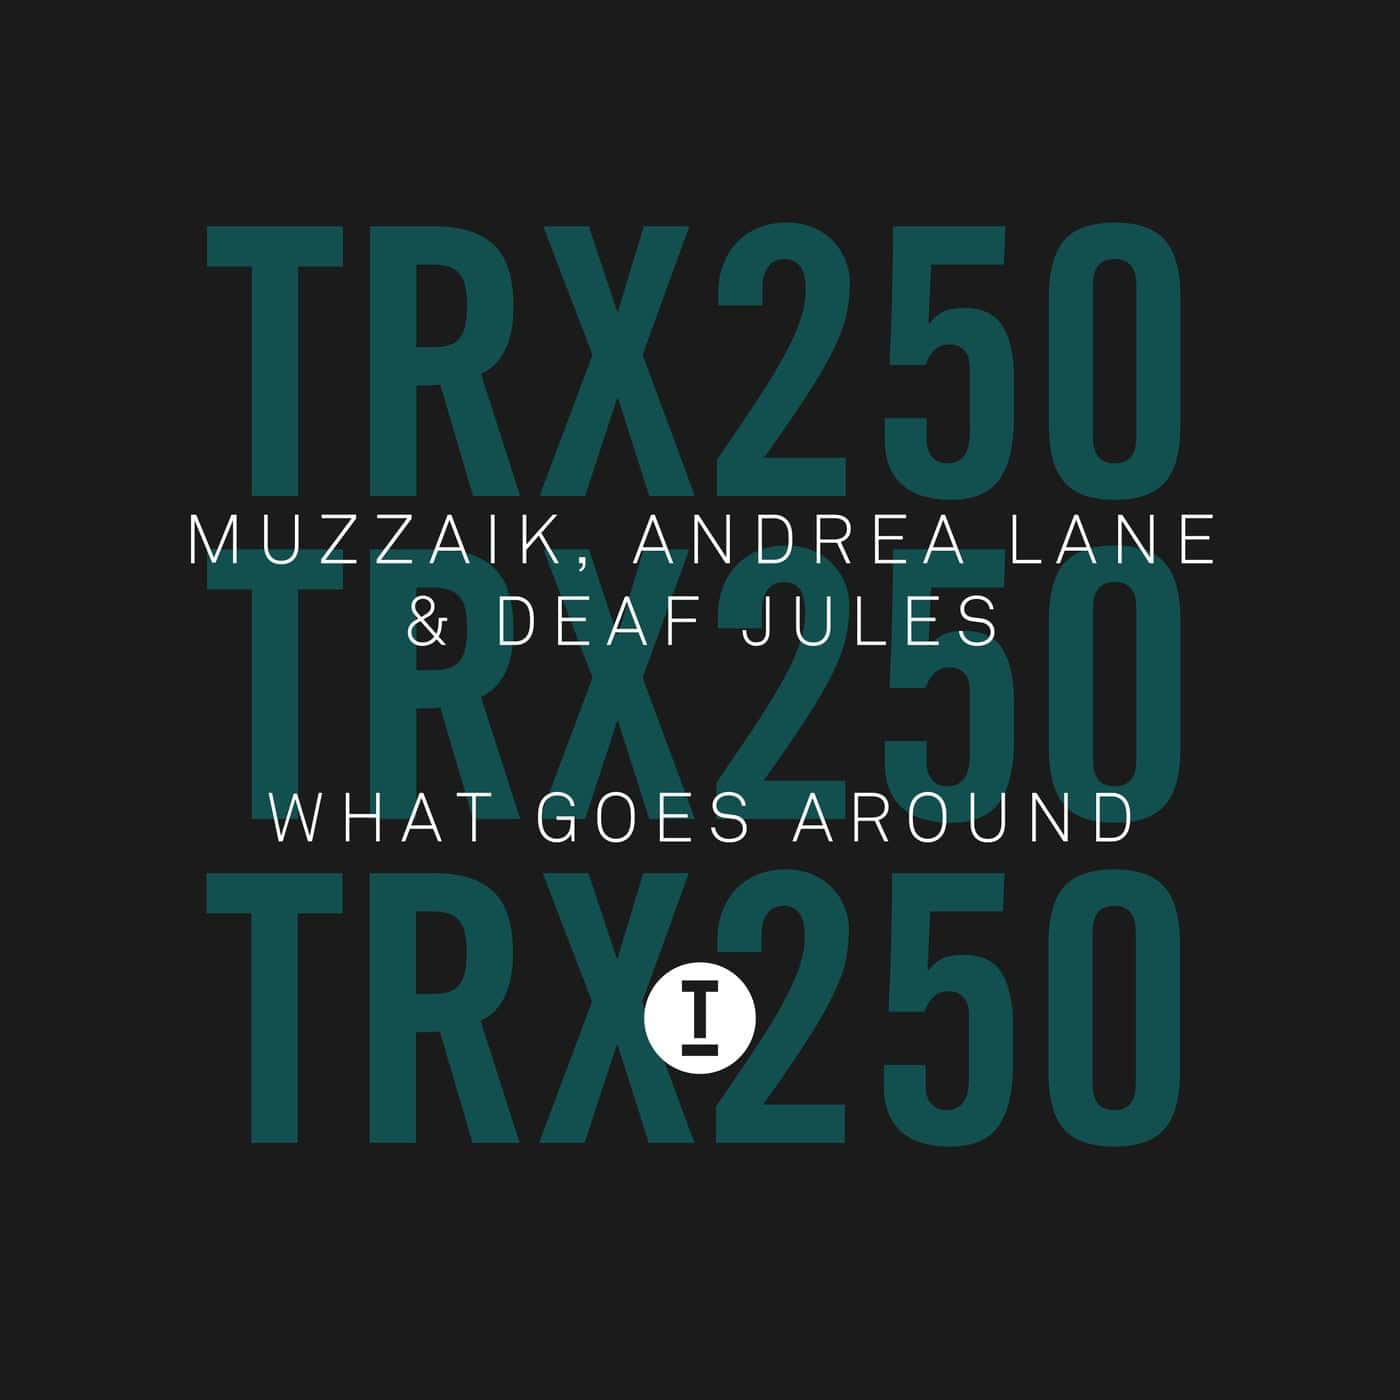 Download Muzzaik, Andrea Lane, Deaf Jules - What Goes Around on Electrobuzz